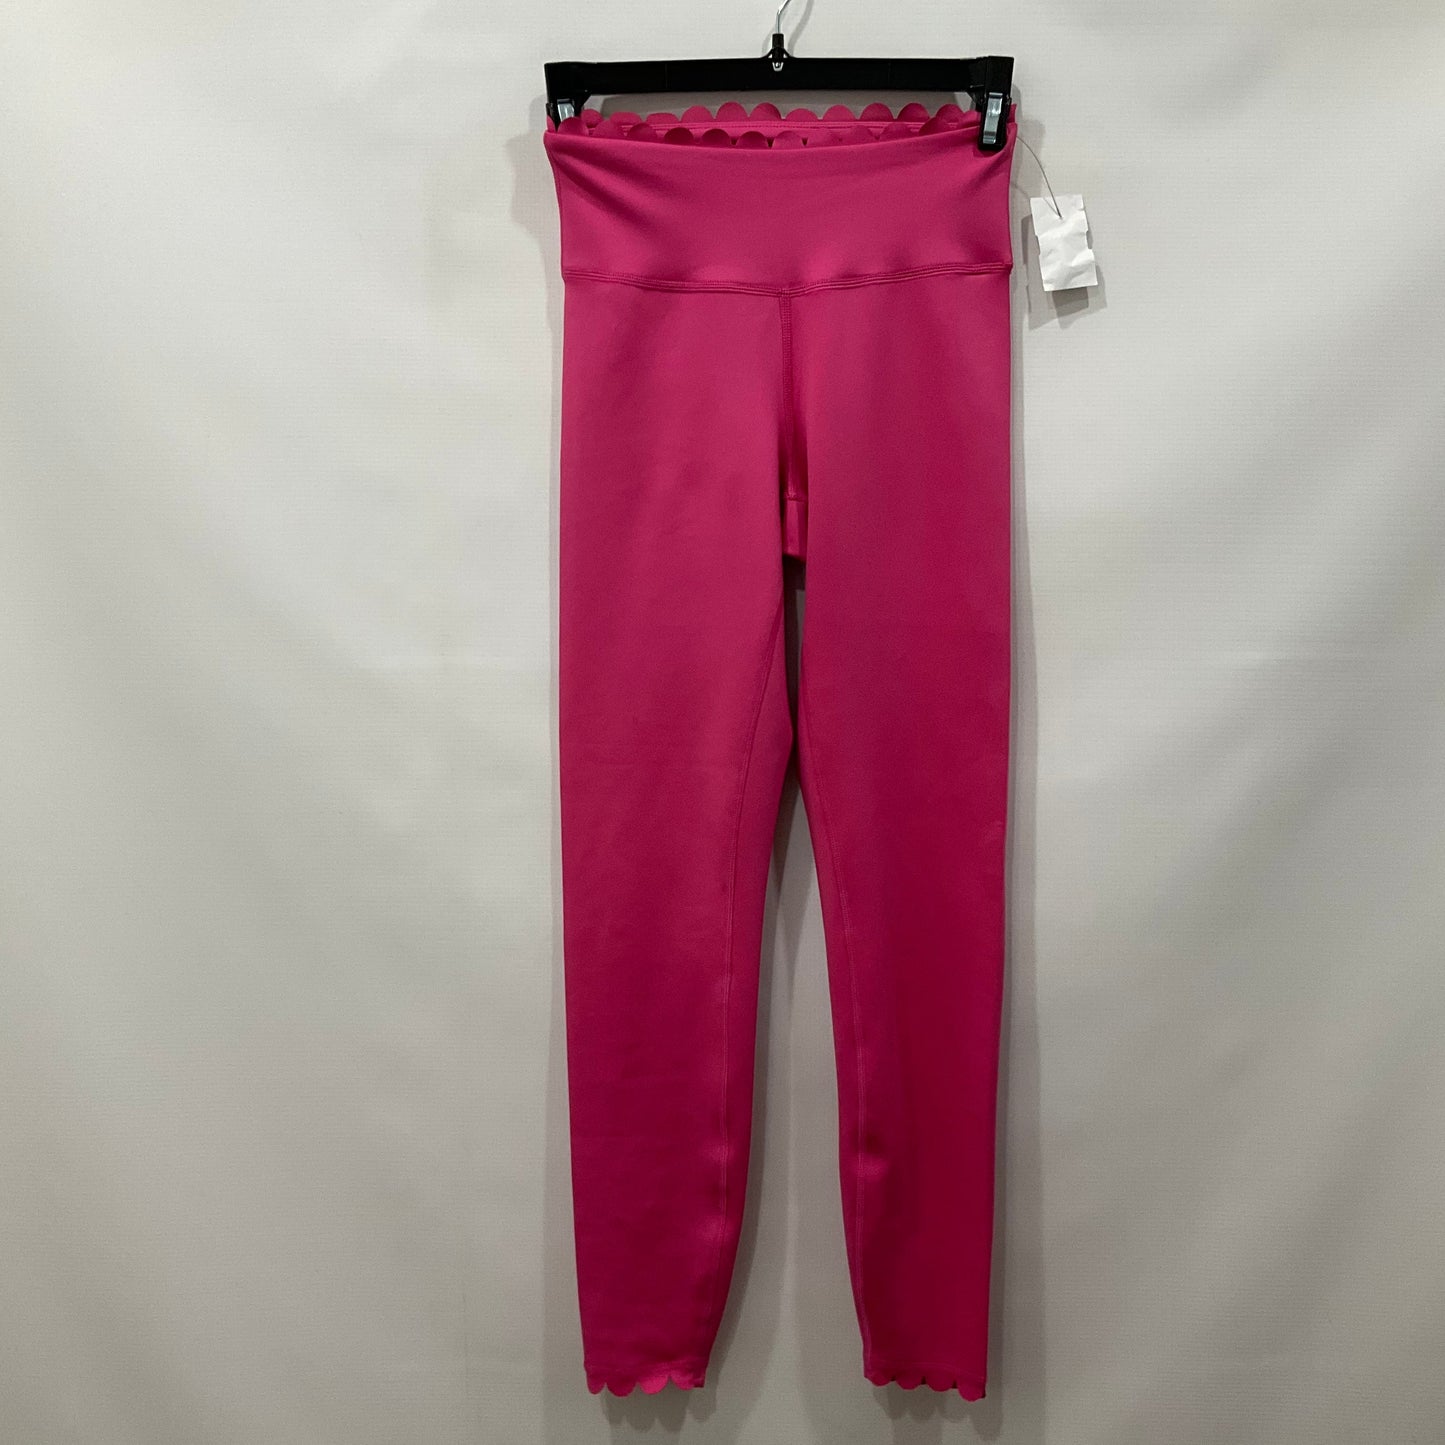 Pink Athletic Leggings Ivl Collective, Size 2